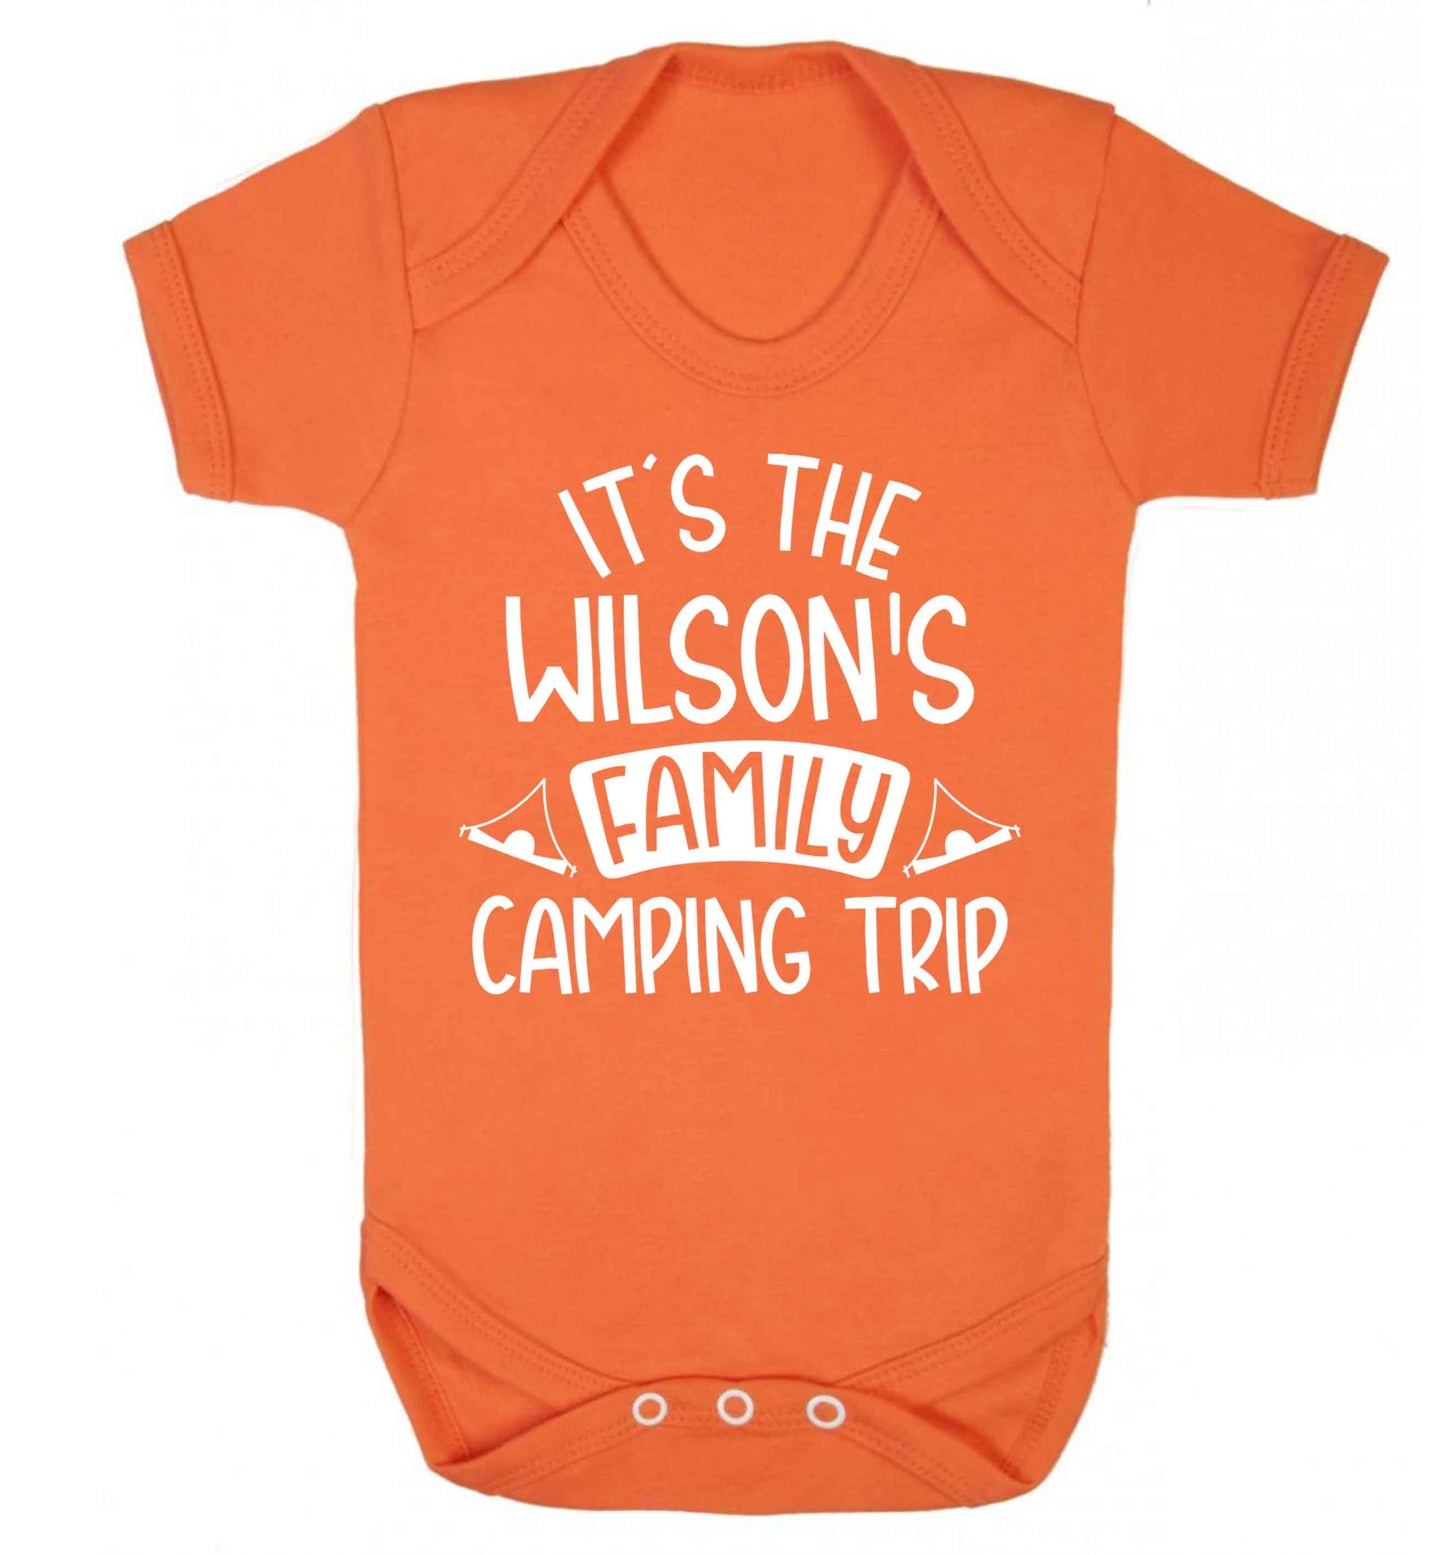 It's the Wilson's family camping trip personalised Baby Vest orange 18-24 months